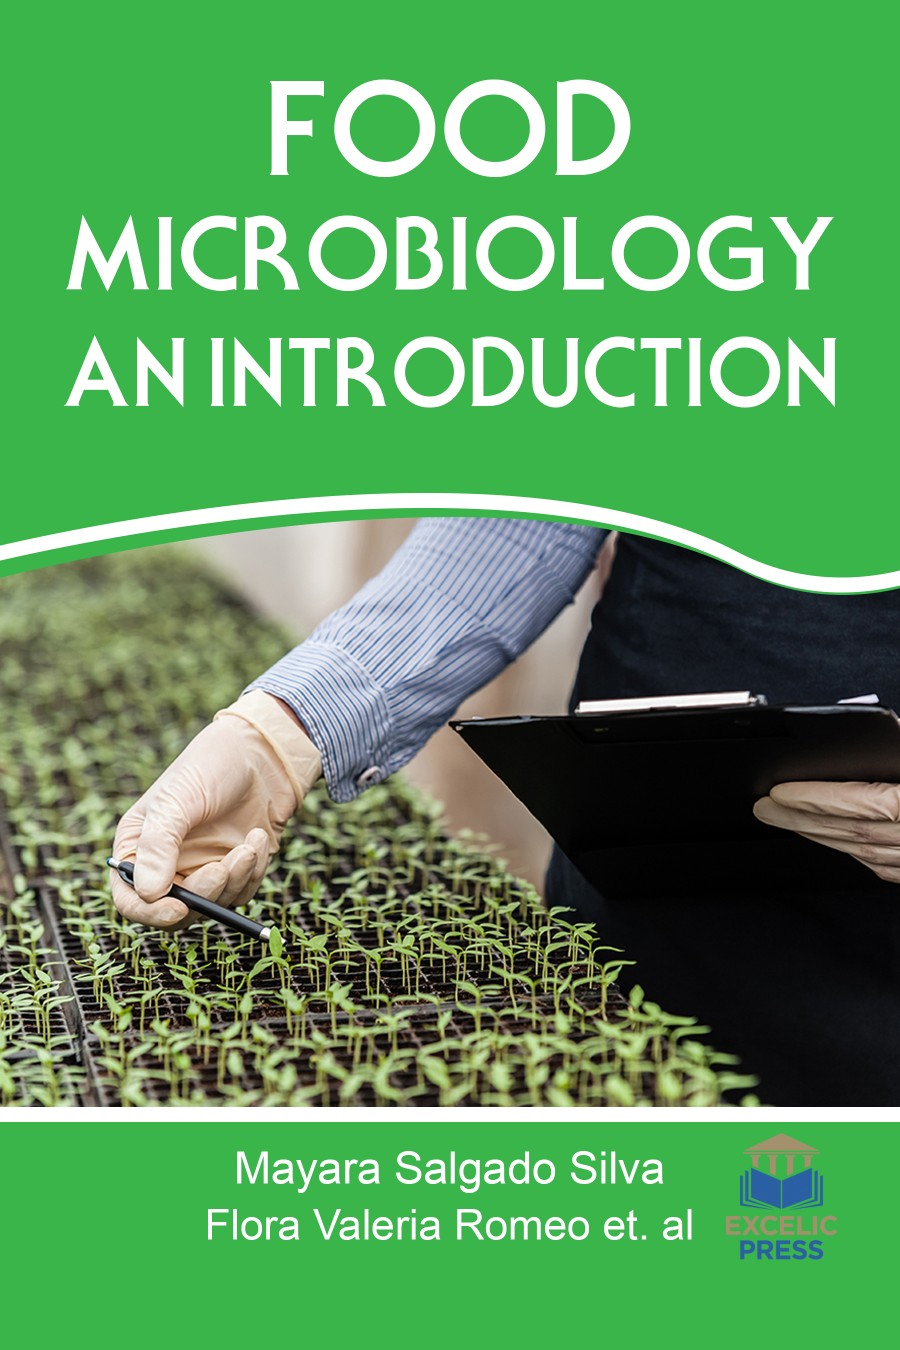 case study on food microbiology